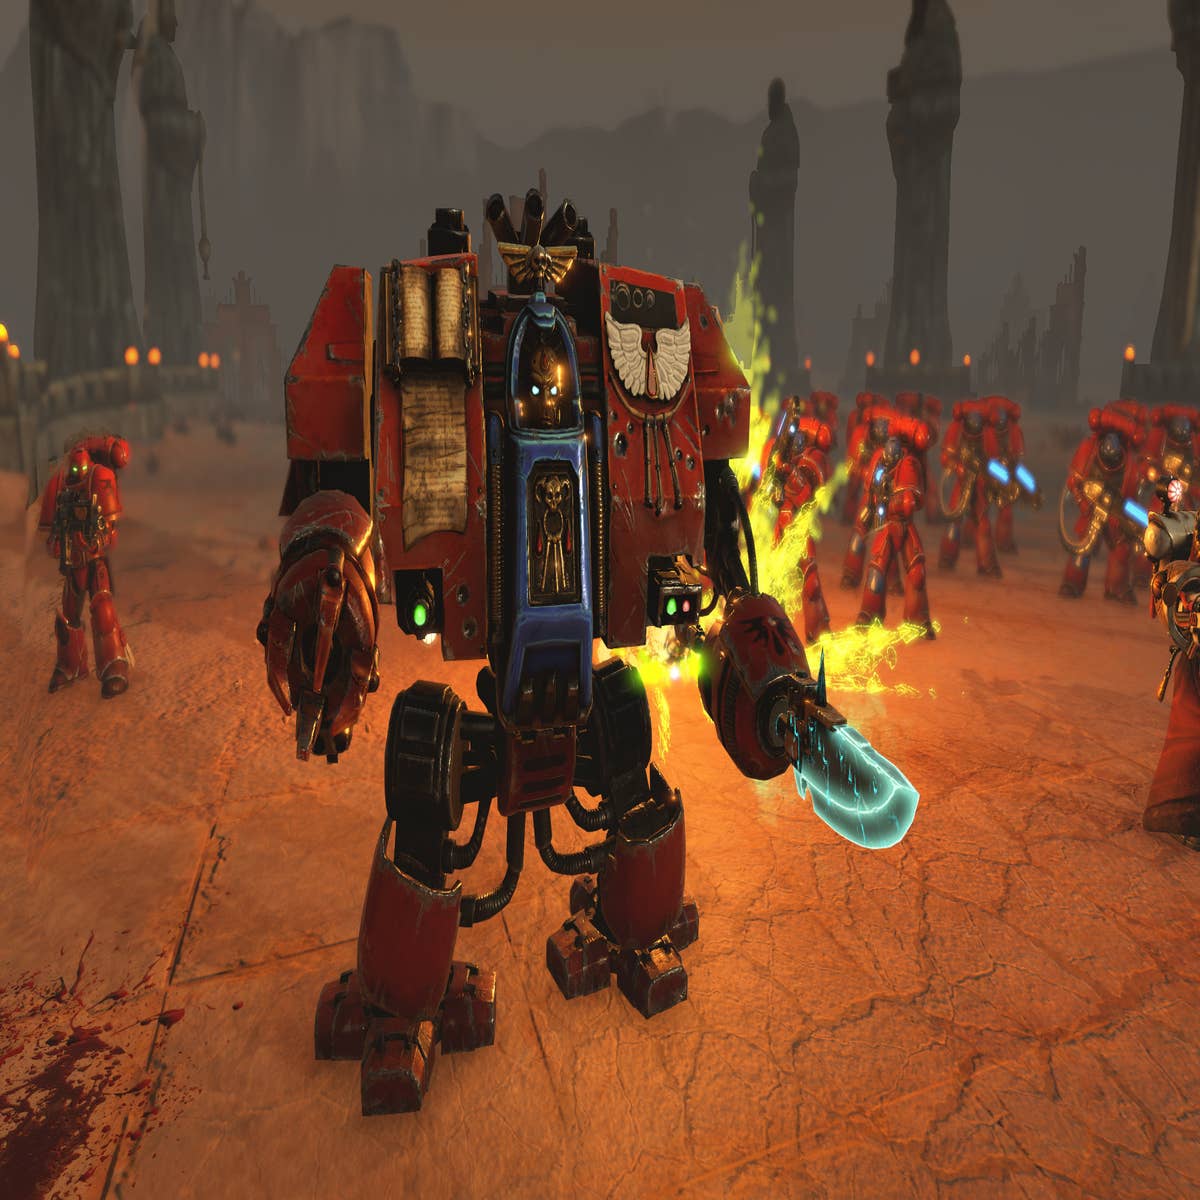 Warhammer 40,000: Boltgun | Download and Buy Today - Epic Games Store